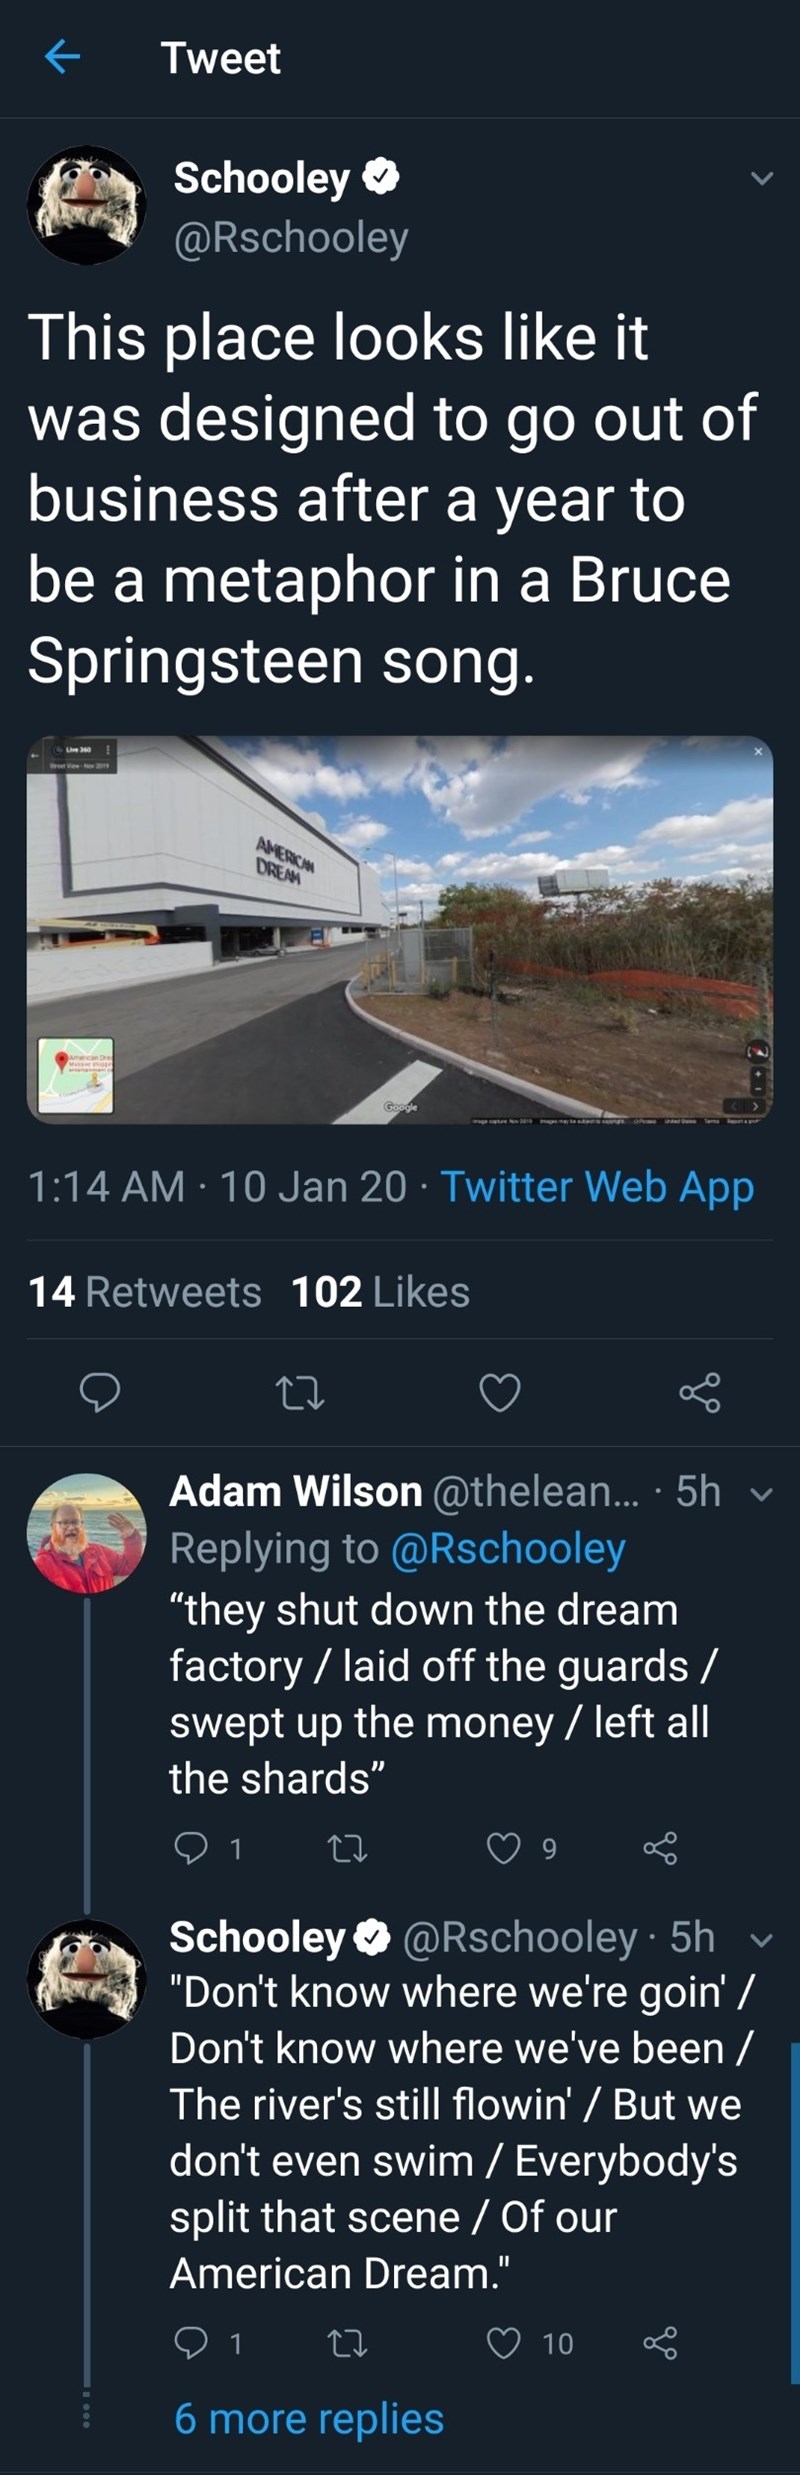 sky - Tweet Schooley This place looks it was designed to go out of business after a year to be a metaphor in a Bruce Springsteen song. Amer Dren 10 Jan 20 Twitter Web App 14 102 Adam Wilson ... . 5hv "they shut down the dream factory laid off the guards s